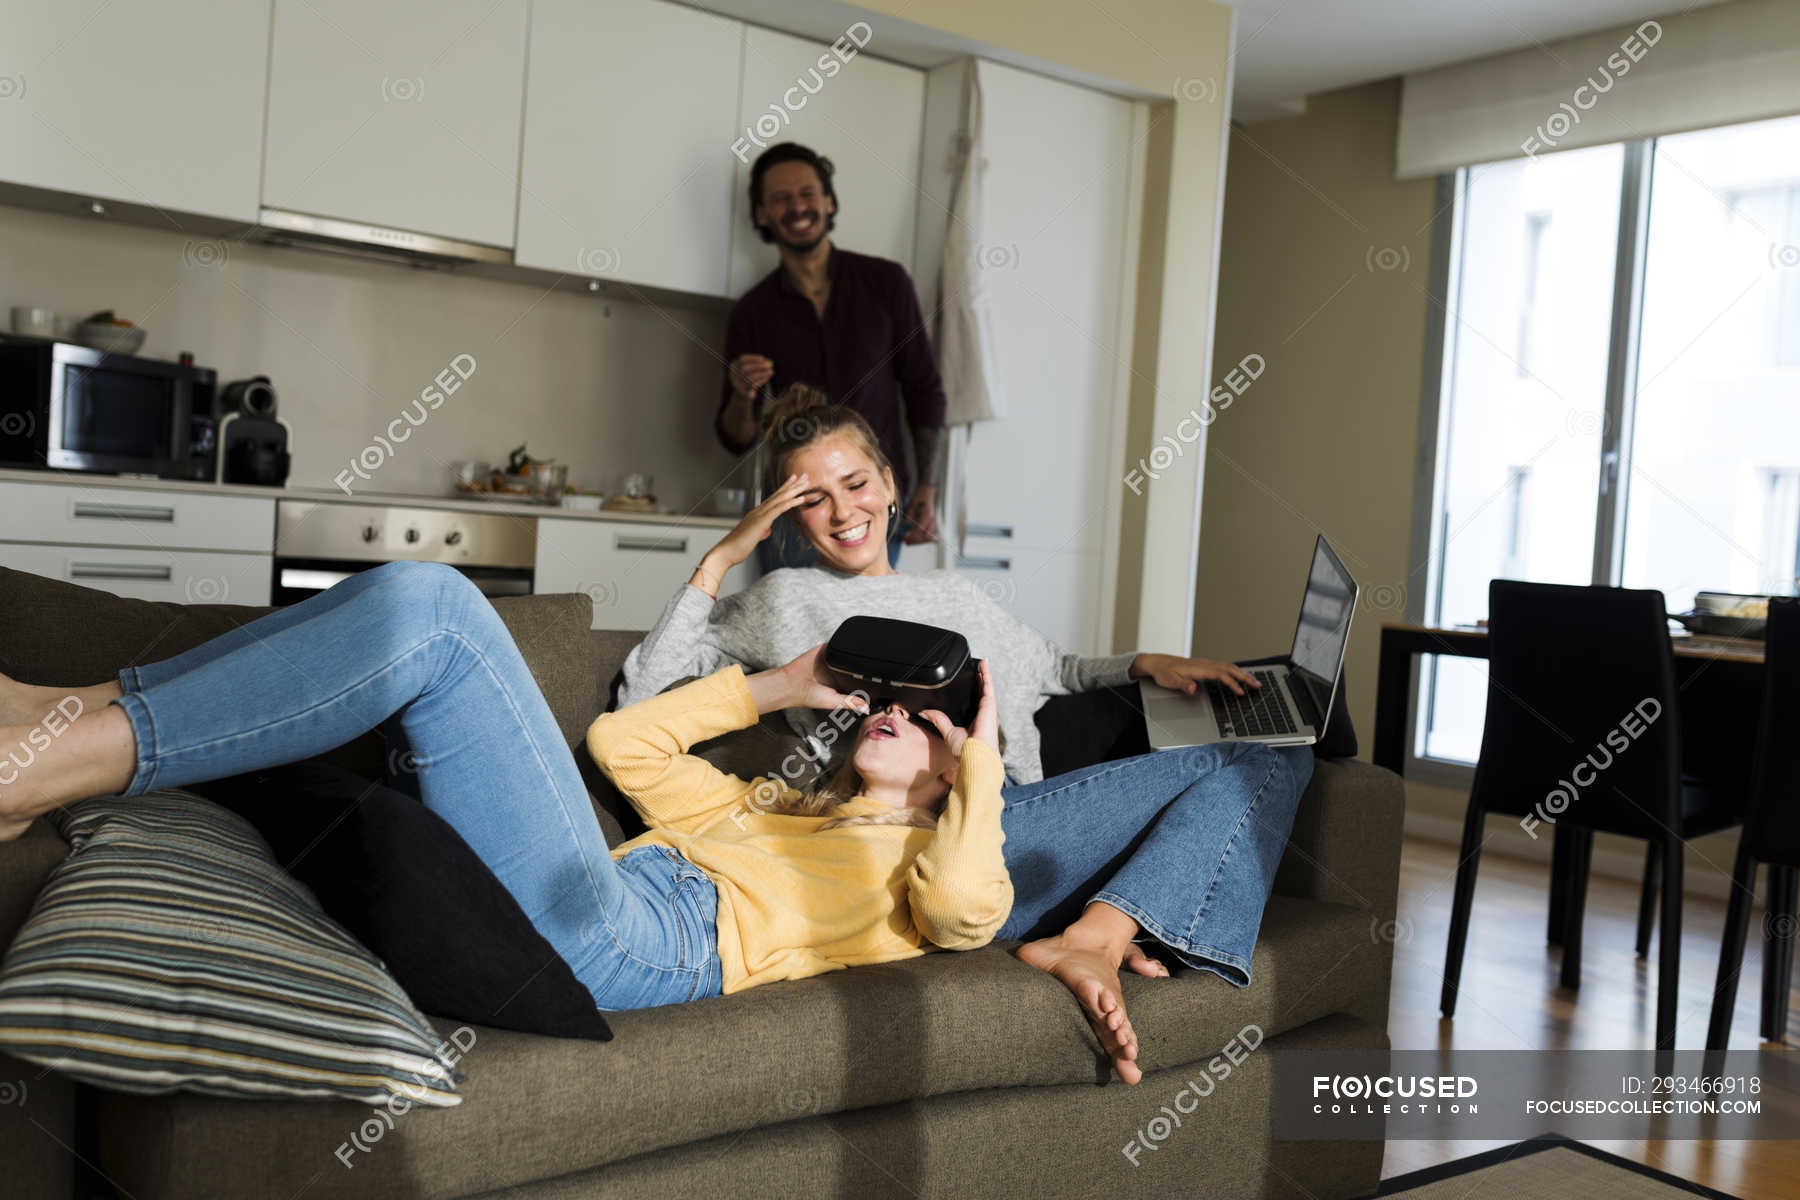 Living Room Couch Stock Photo